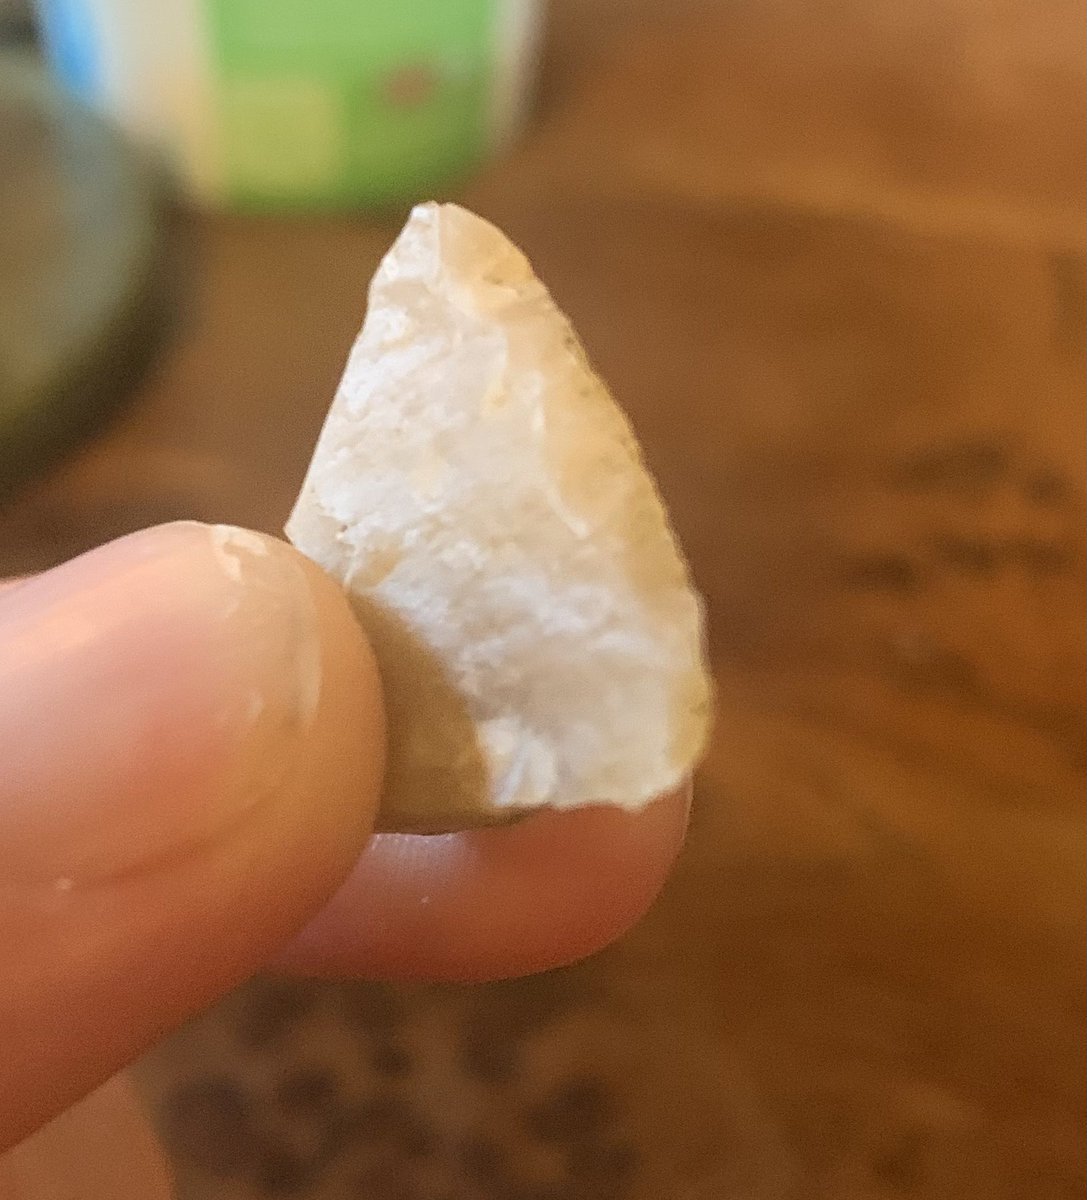 My son found this flint in a coastal area with little flint around. Is it a triangular geometric microlith? Can anyone tell me if it has been knapped?